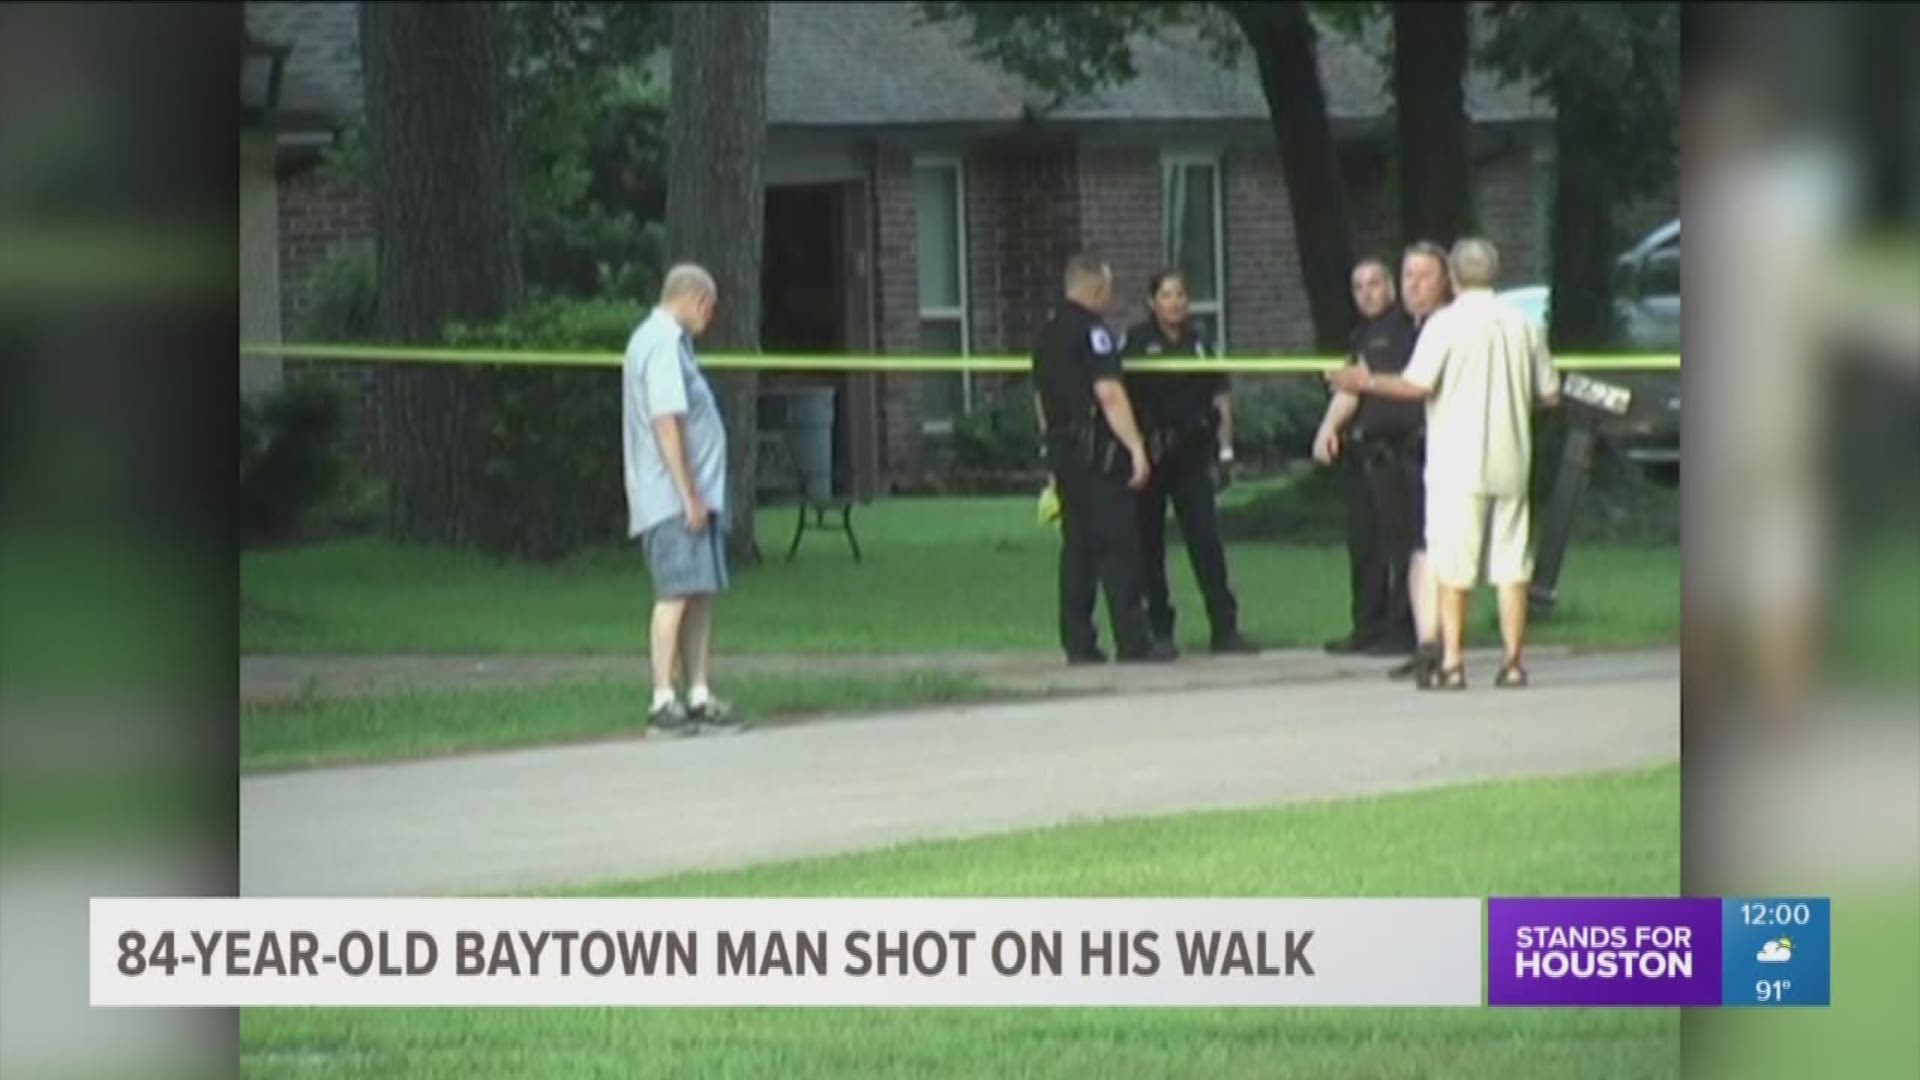 An 84 year old man was rushed to the hospital after he was shot on his morning walk in Baytown. Police say the gunman drove by the man and shot him in the stomach before fleeing the scene.